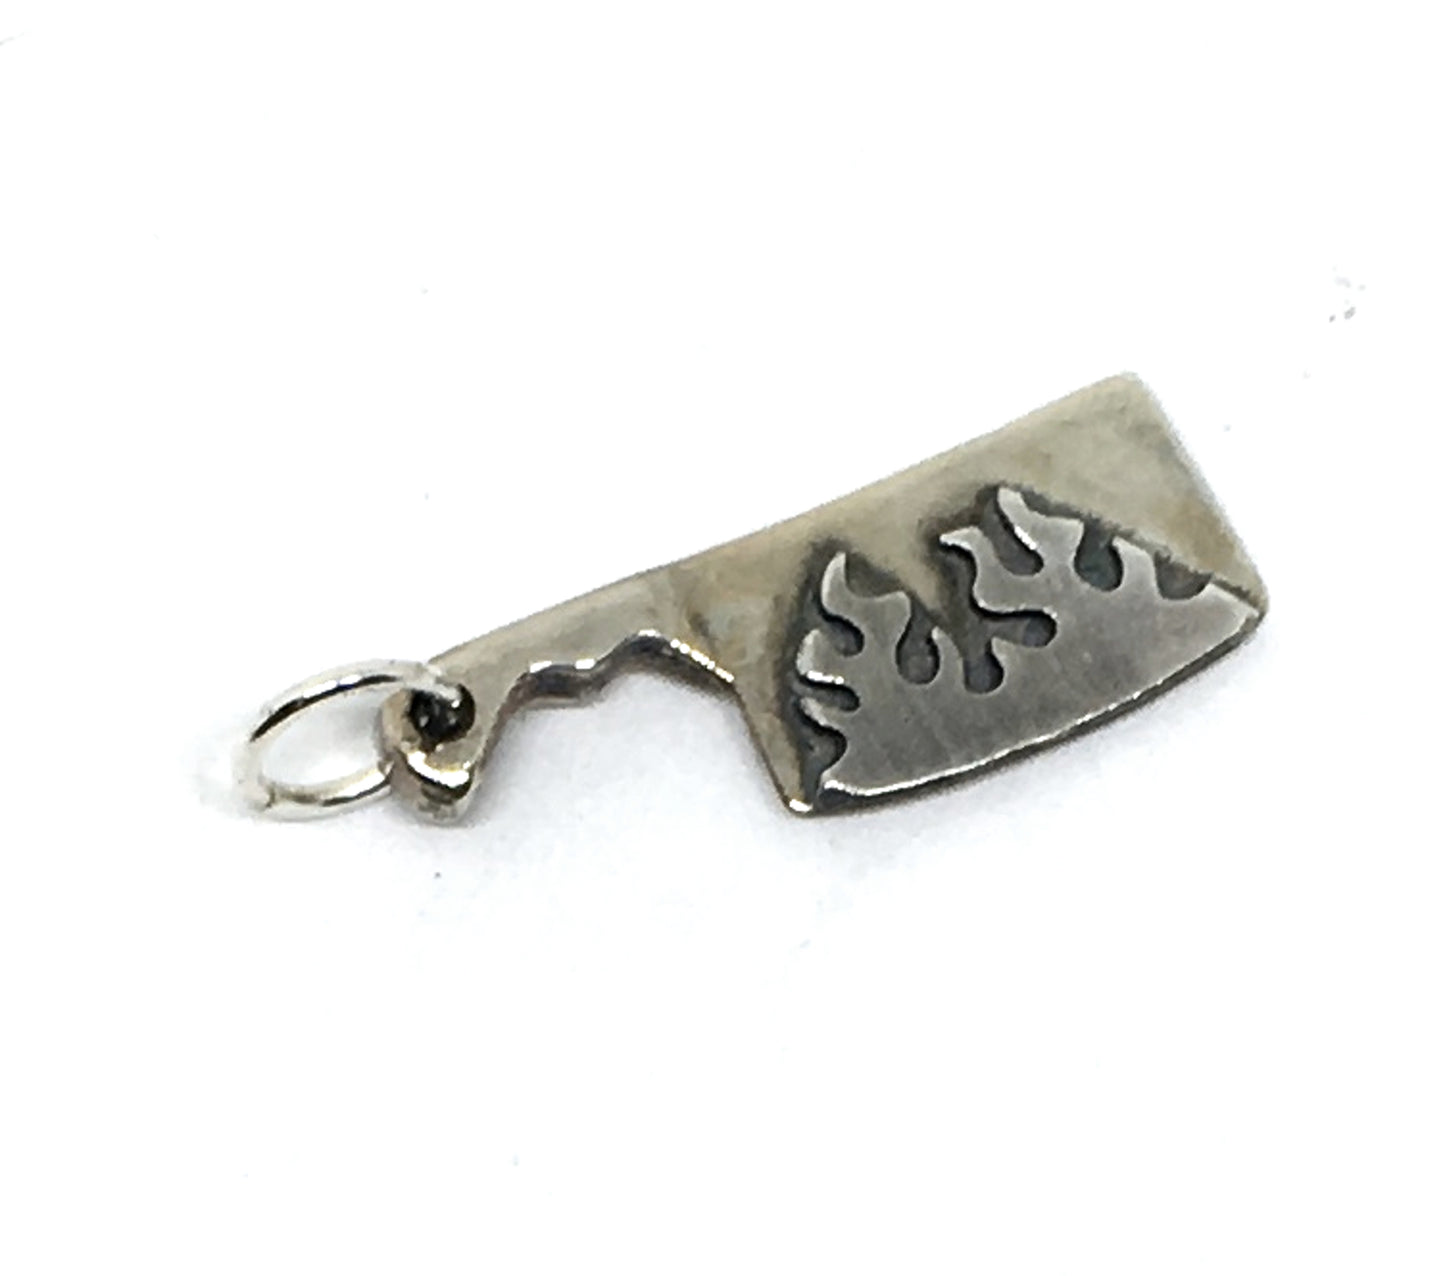 this cleaver charm can be added to a charm bracelet or slipped onto a chaim